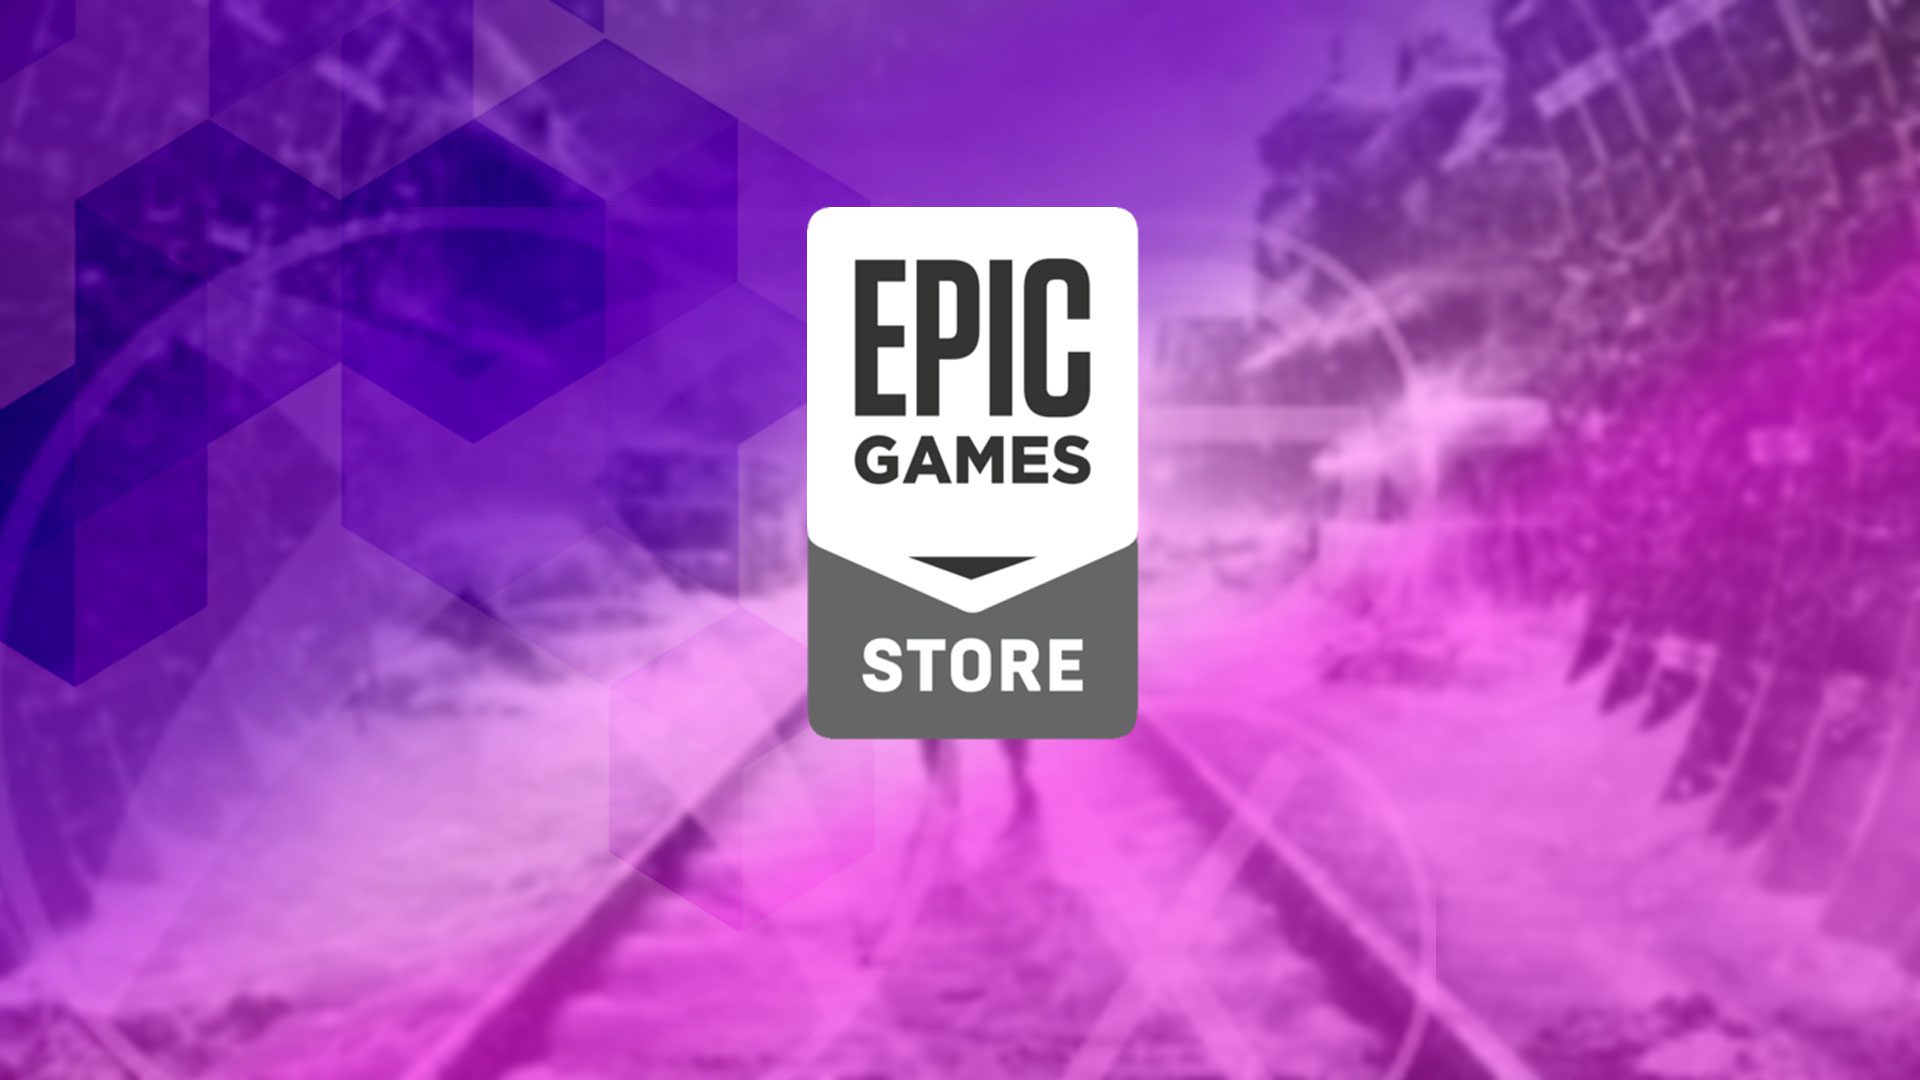 Next week, these two free games will be available on the Epic Games Store